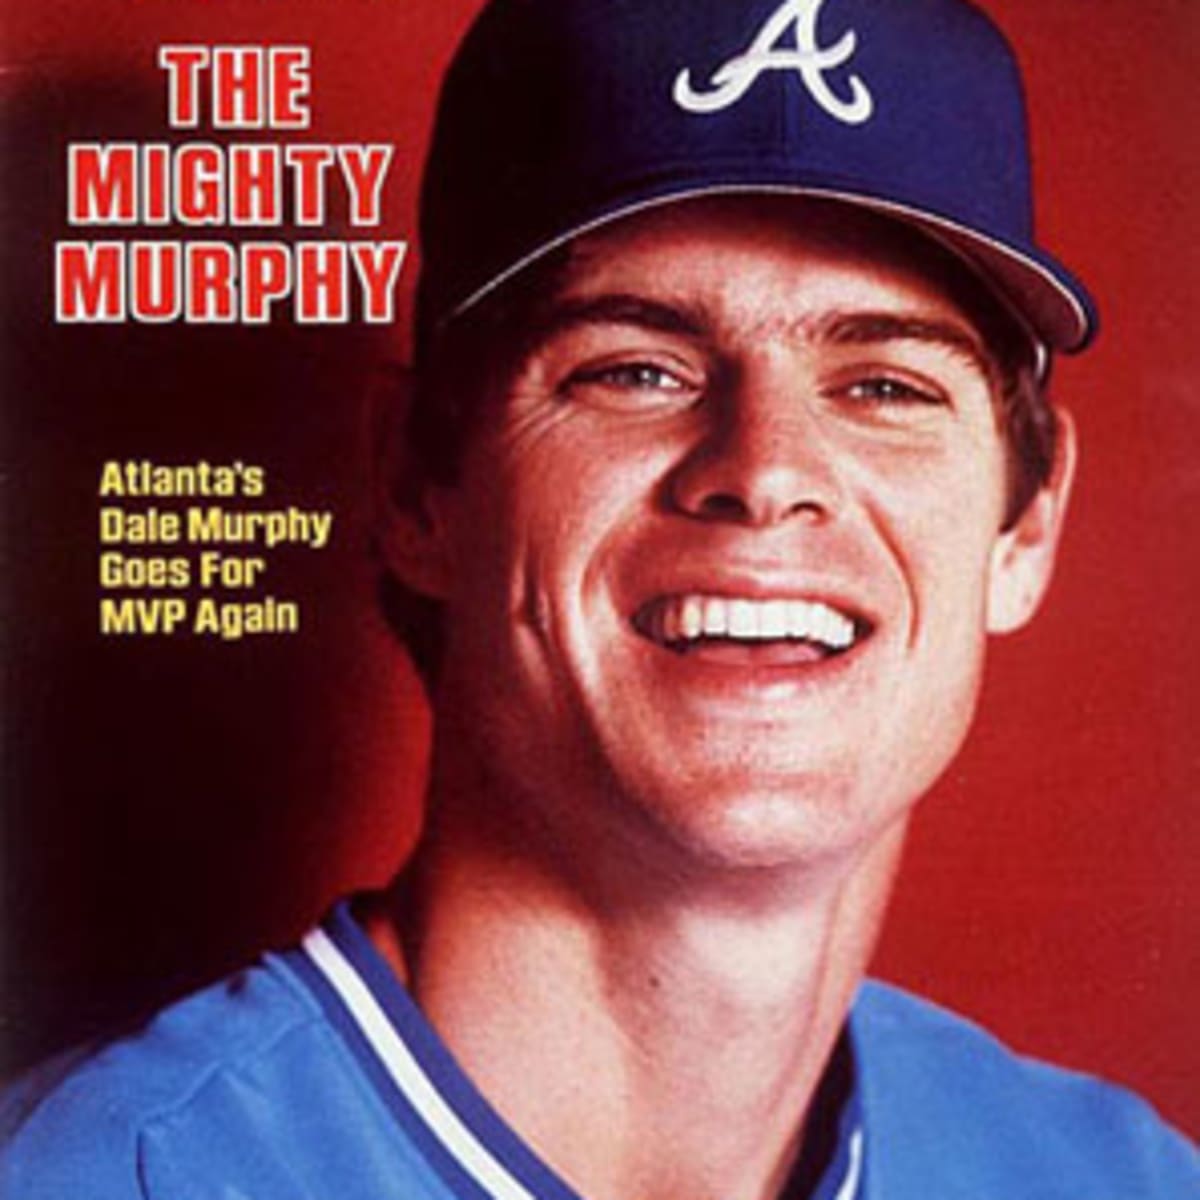 How long was Dale Murphy the best player in baseball? - Baseball Egg